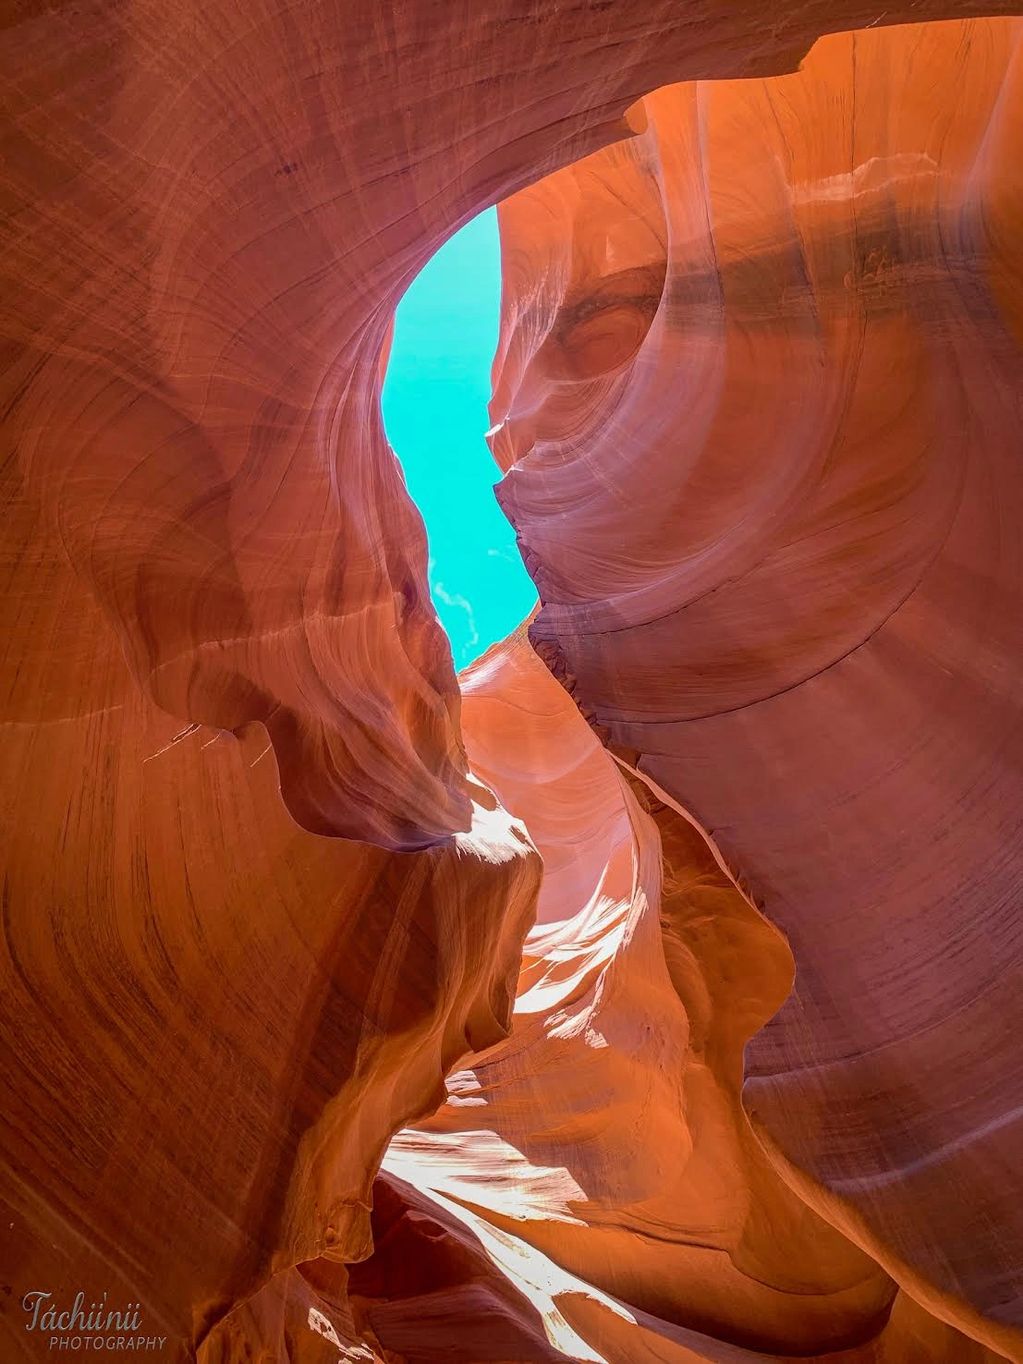 Antelope Canyon  - stairway 
20 by 24 with 1-inch white border on archival paper. 